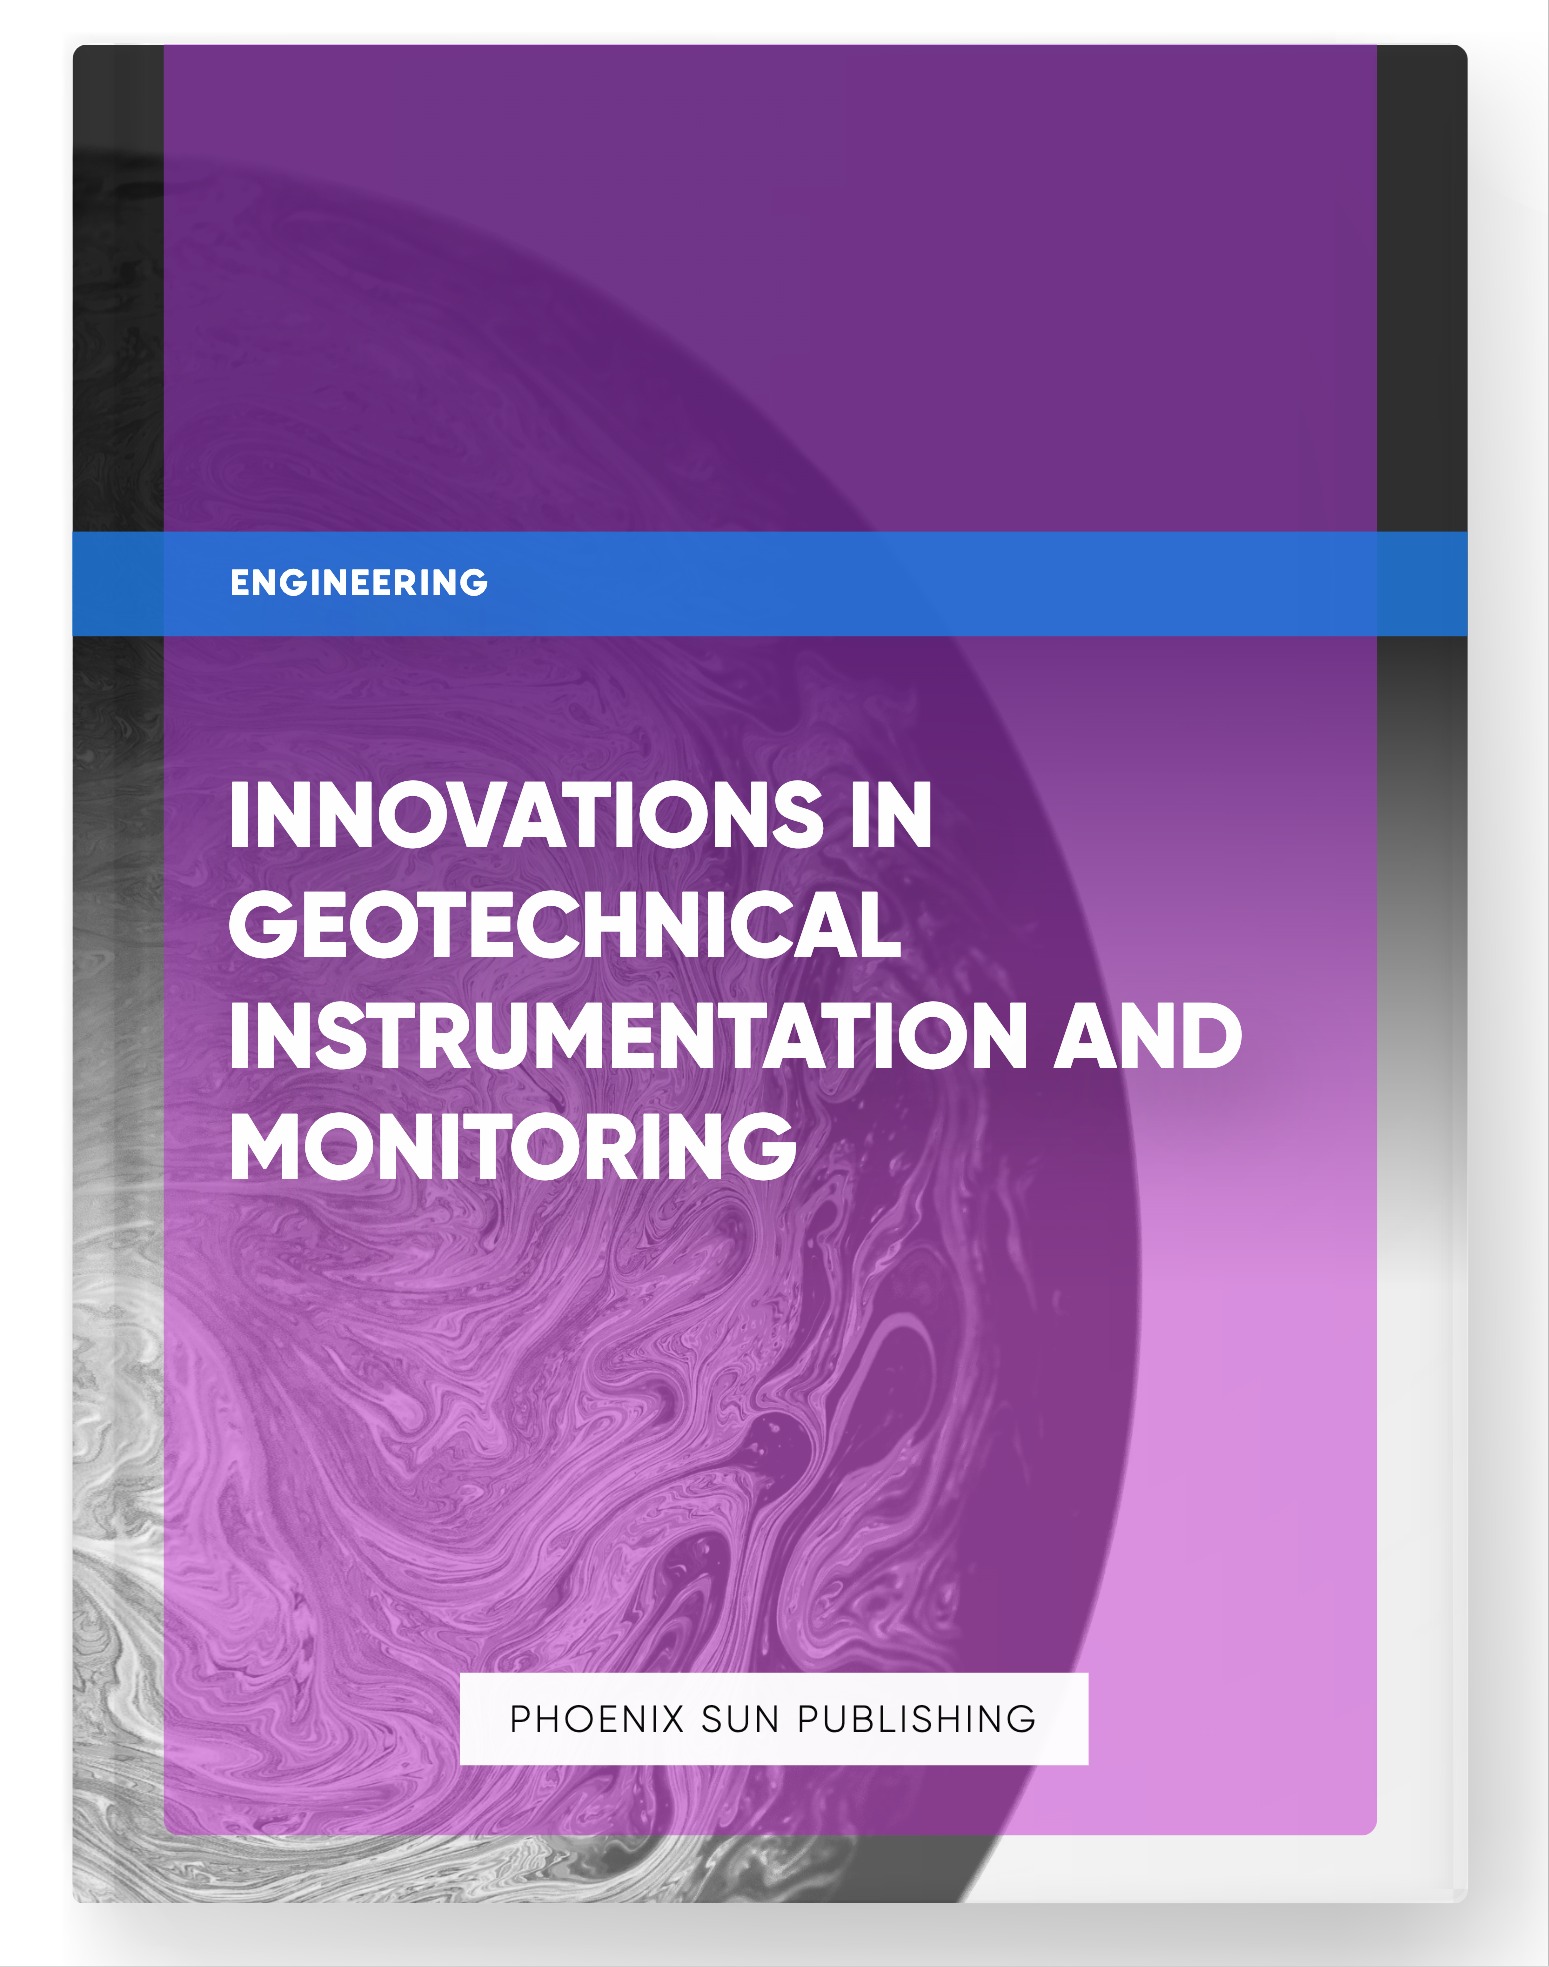 Innovations in Geotechnical Instrumentation and Monitoring